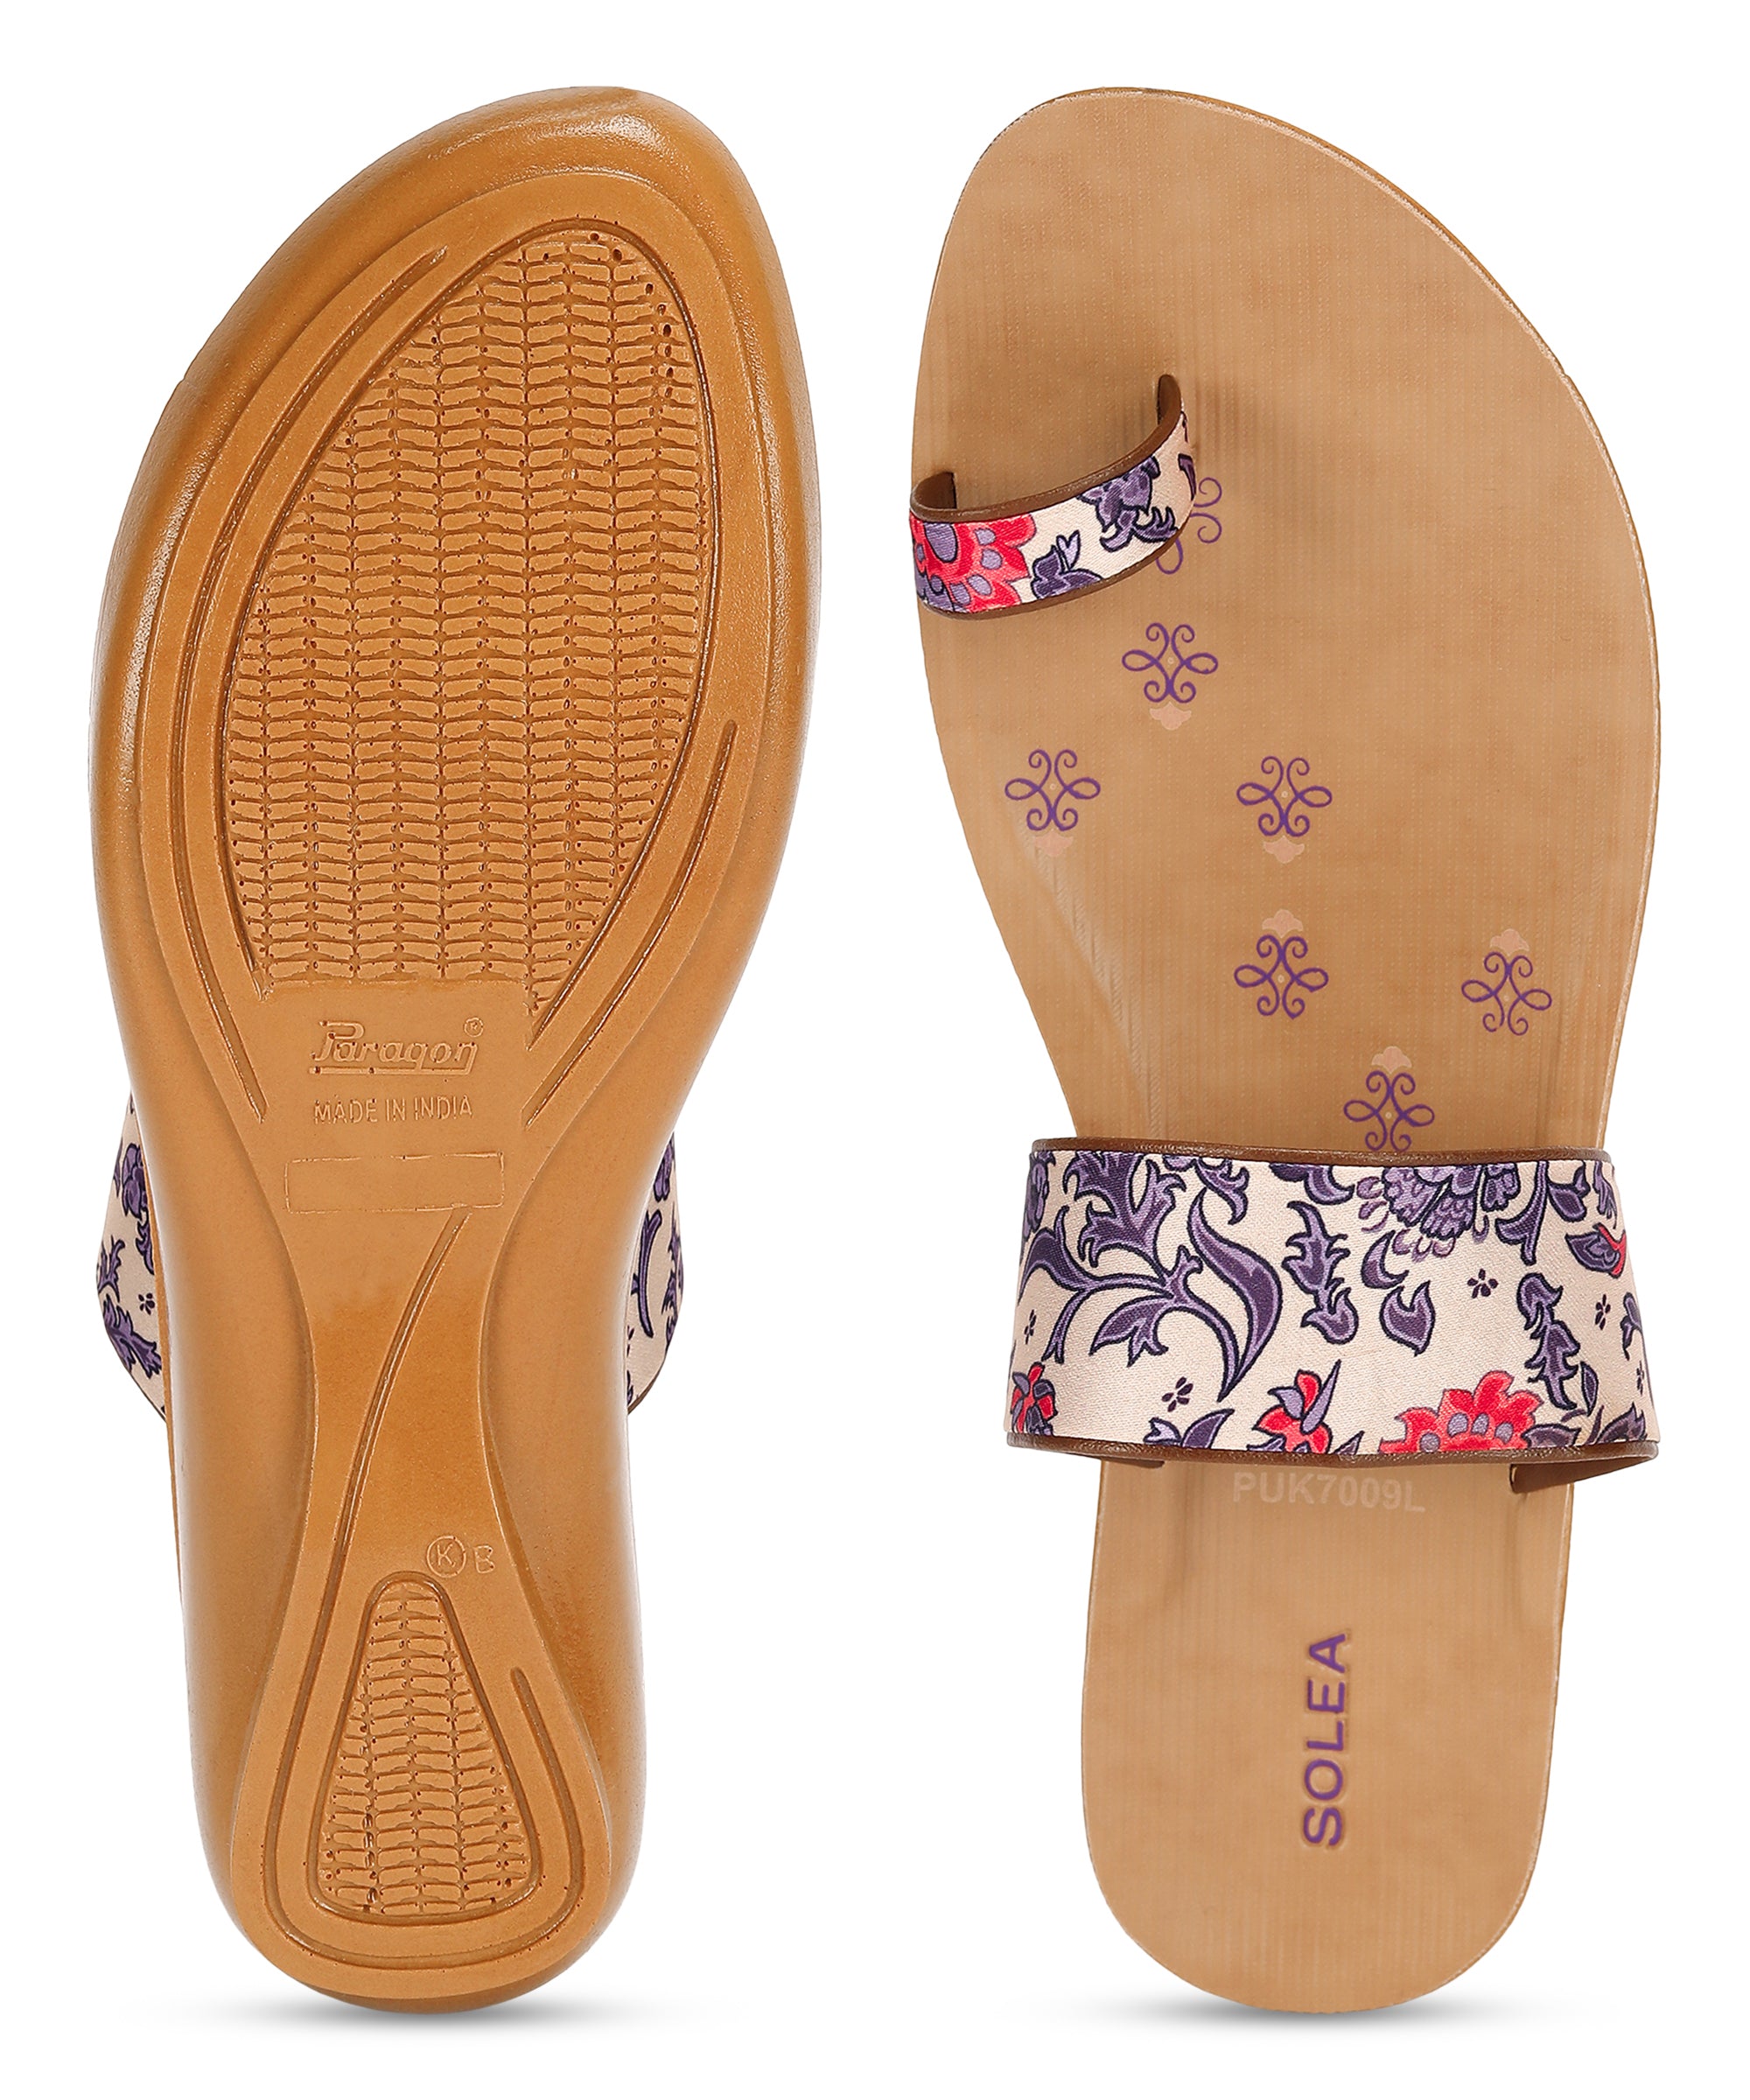 Paragon PUK7009L Women Sandals | Casual &amp; Formal Sandals | Stylish, Comfortable &amp; Durable | For Daily &amp; Occasion Wear